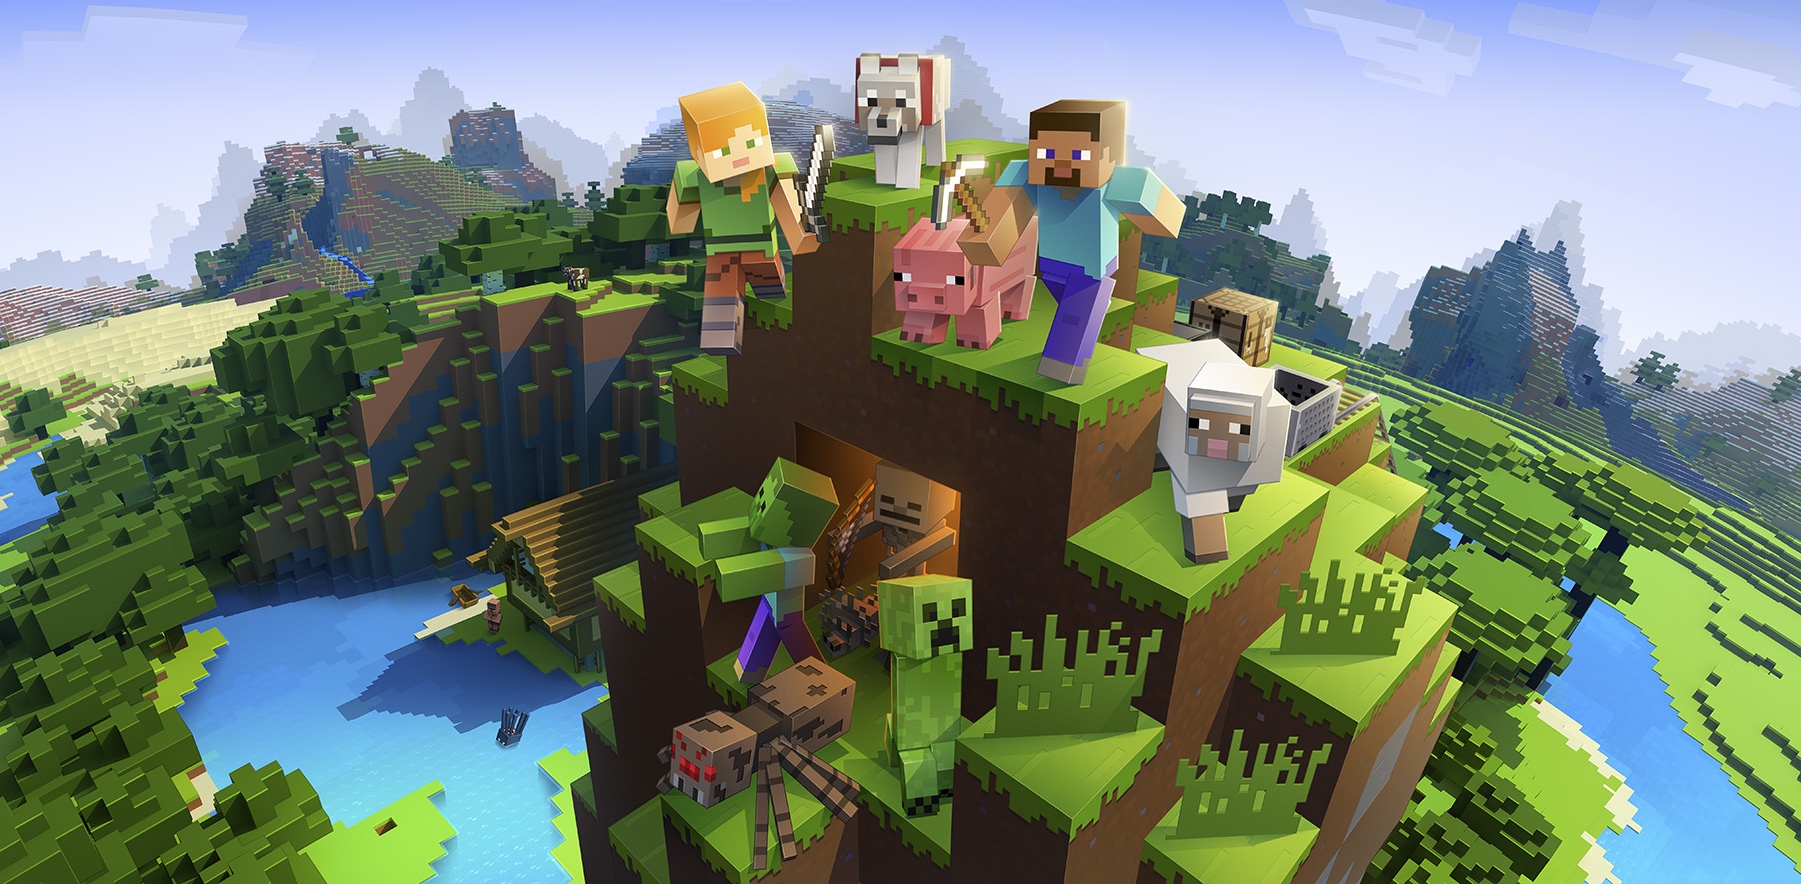 Artwork of Minecraft featuring Steve, Alex, pig, a Creeper and more on a blocky mountain.